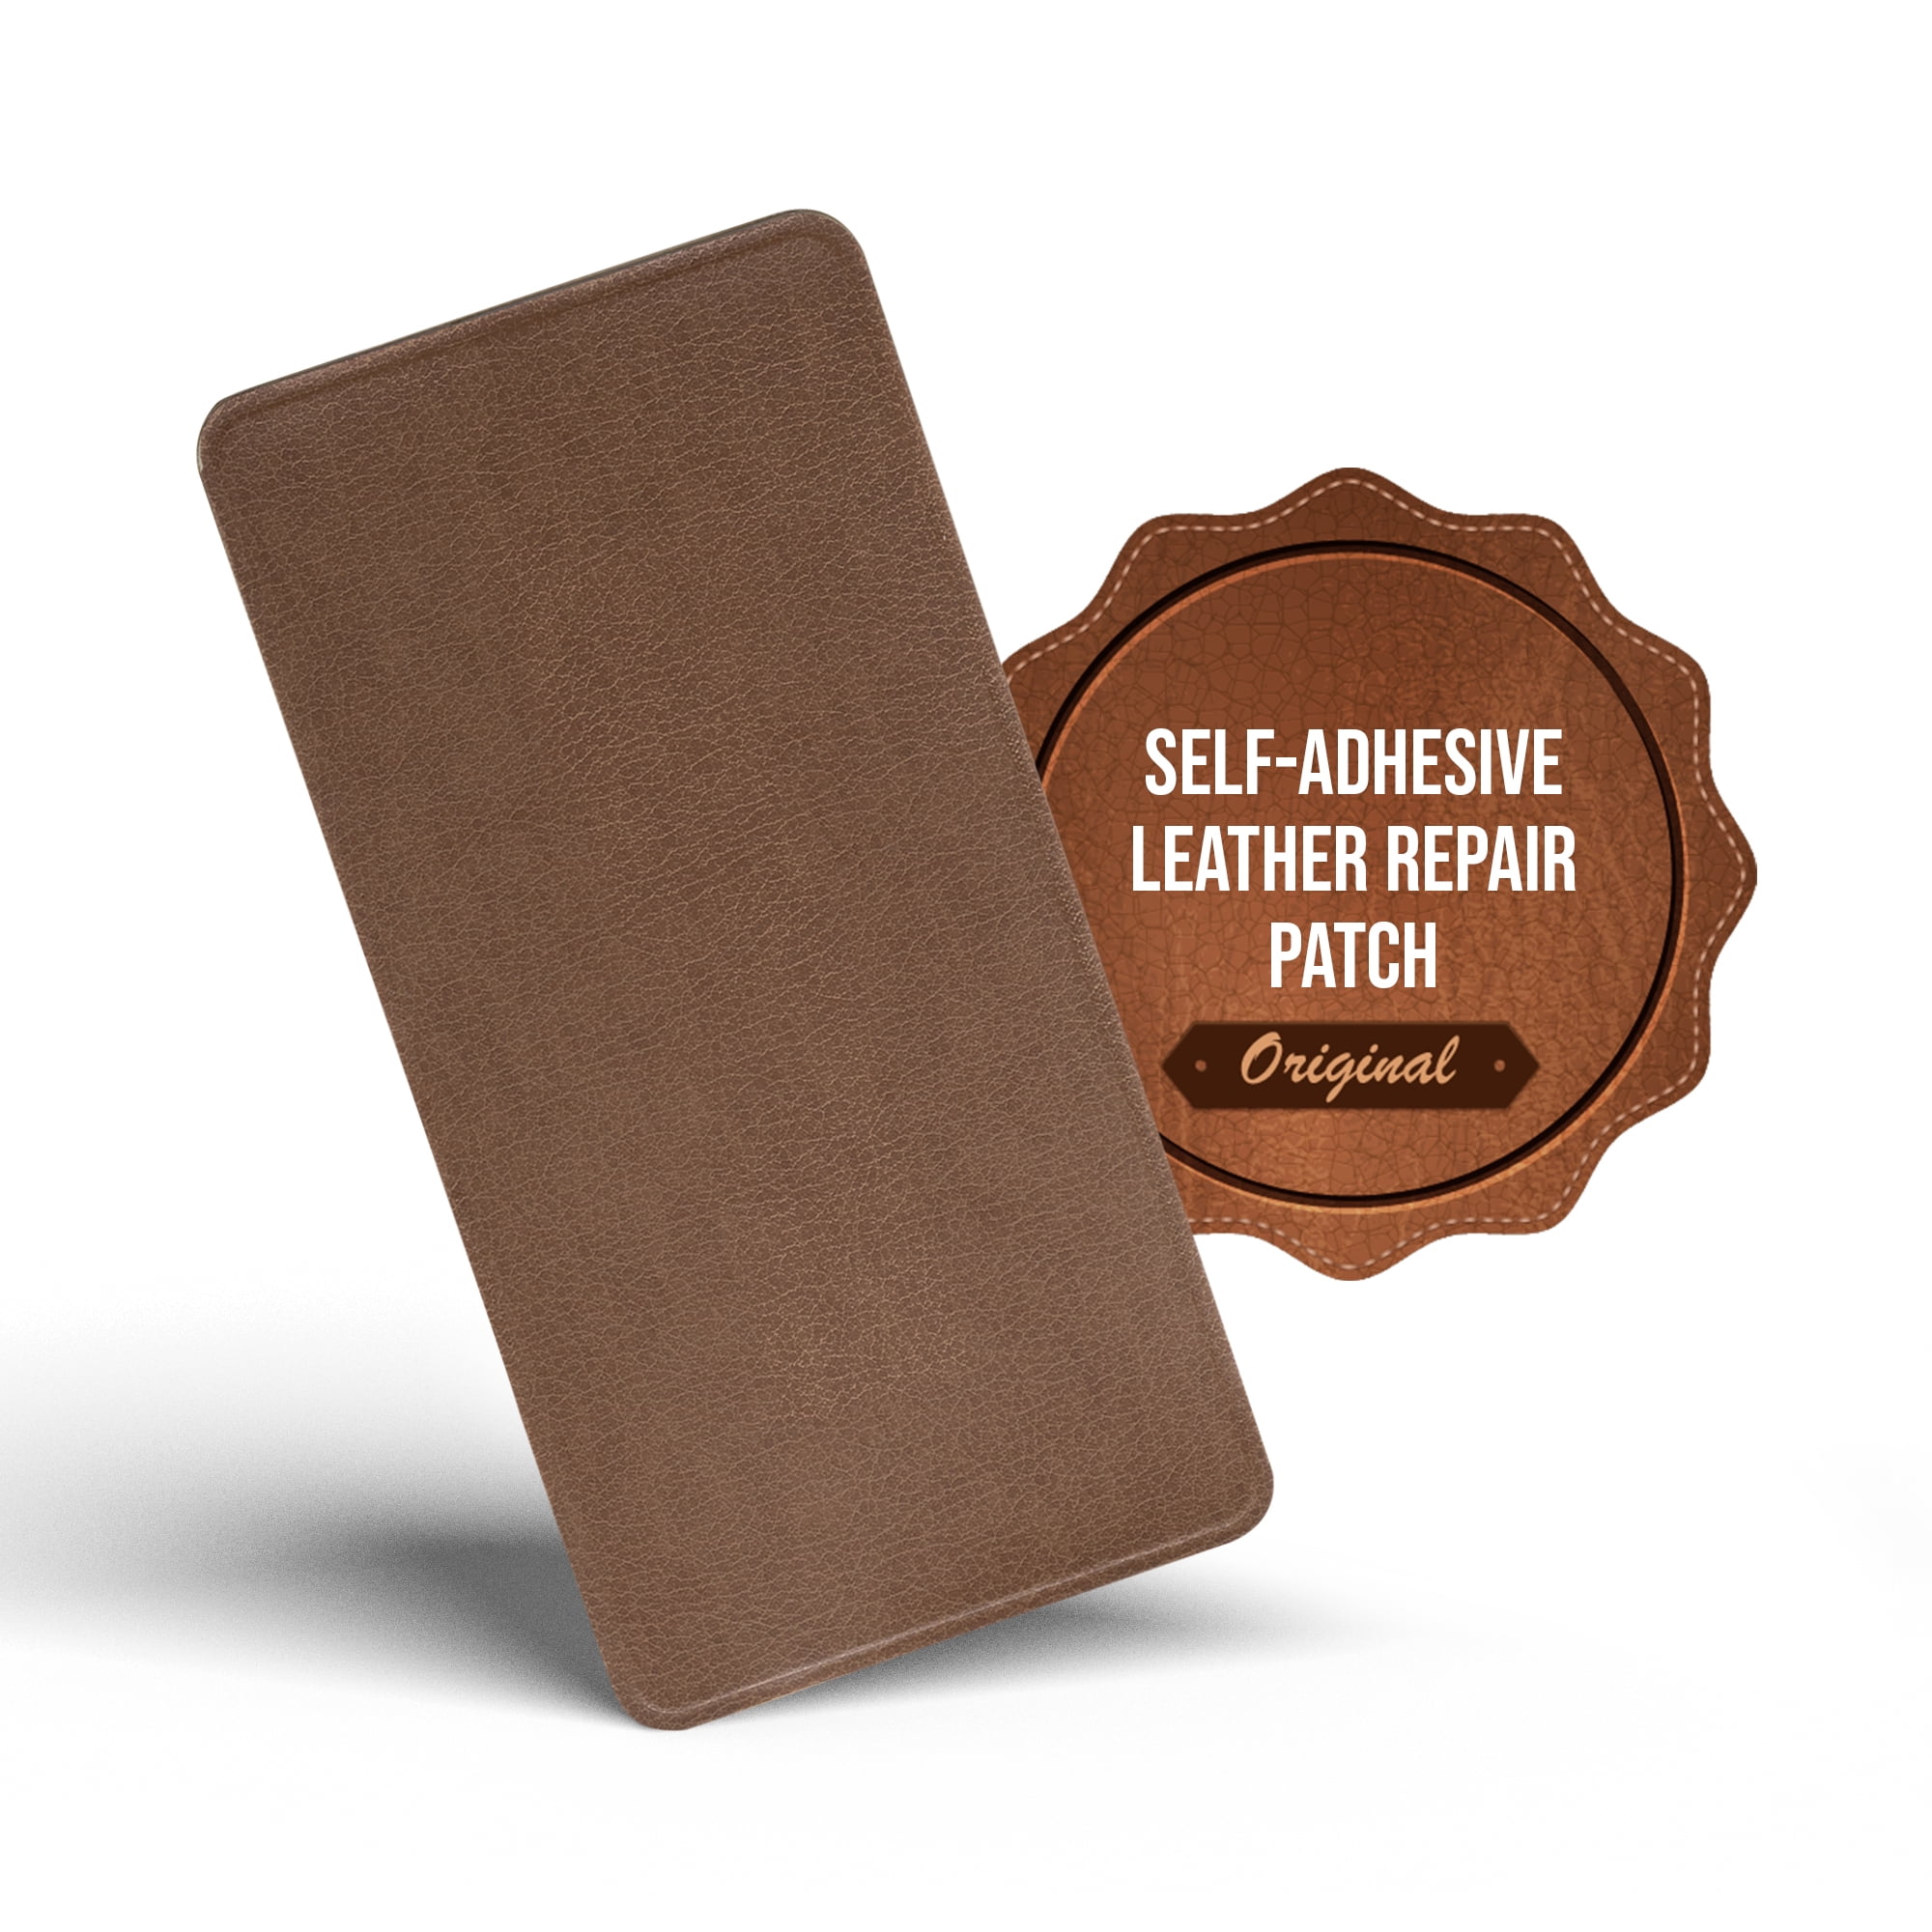 MastaPlasta Self-Adhesive Patch for Leather and Vinyl Repair, XL Suede, Brown - 8 x 11 inch